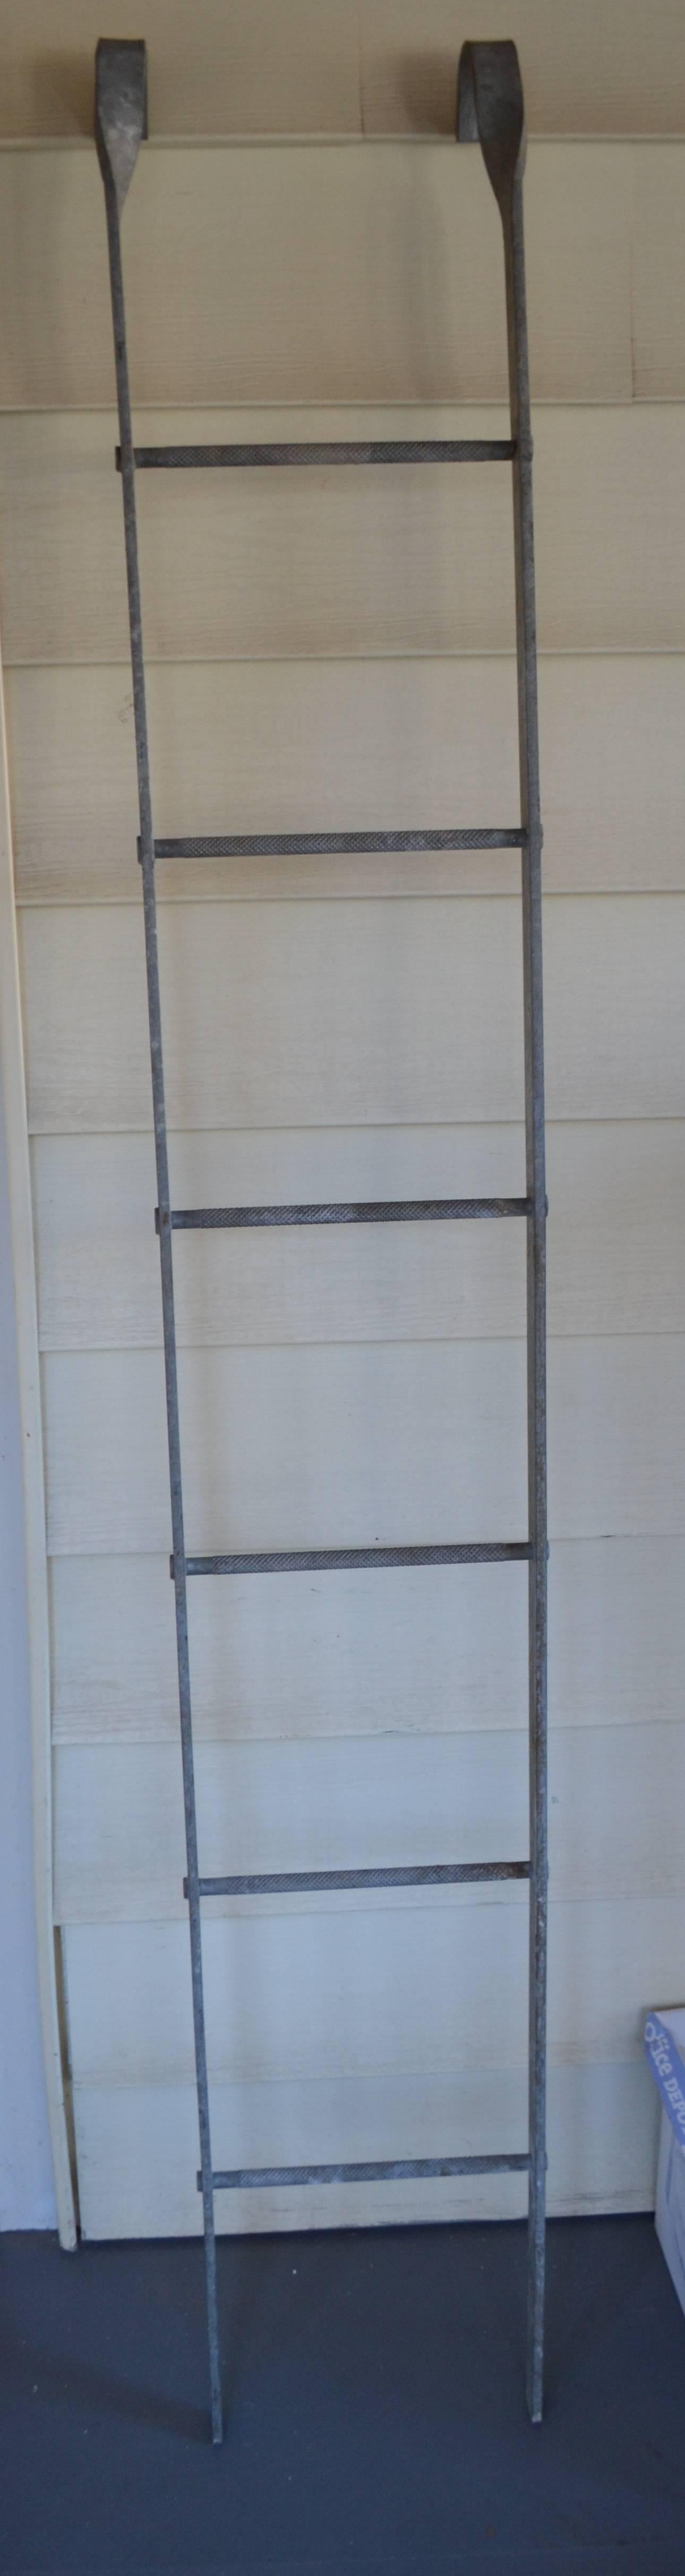 Ladder of galvanized steel with top hooks was used as fire escape or in factory or in store and library for shelf stocking. Note the heavy duty foot grips on each rung. Clean and striking in blue toned steel. Use to display strings of lights or as a